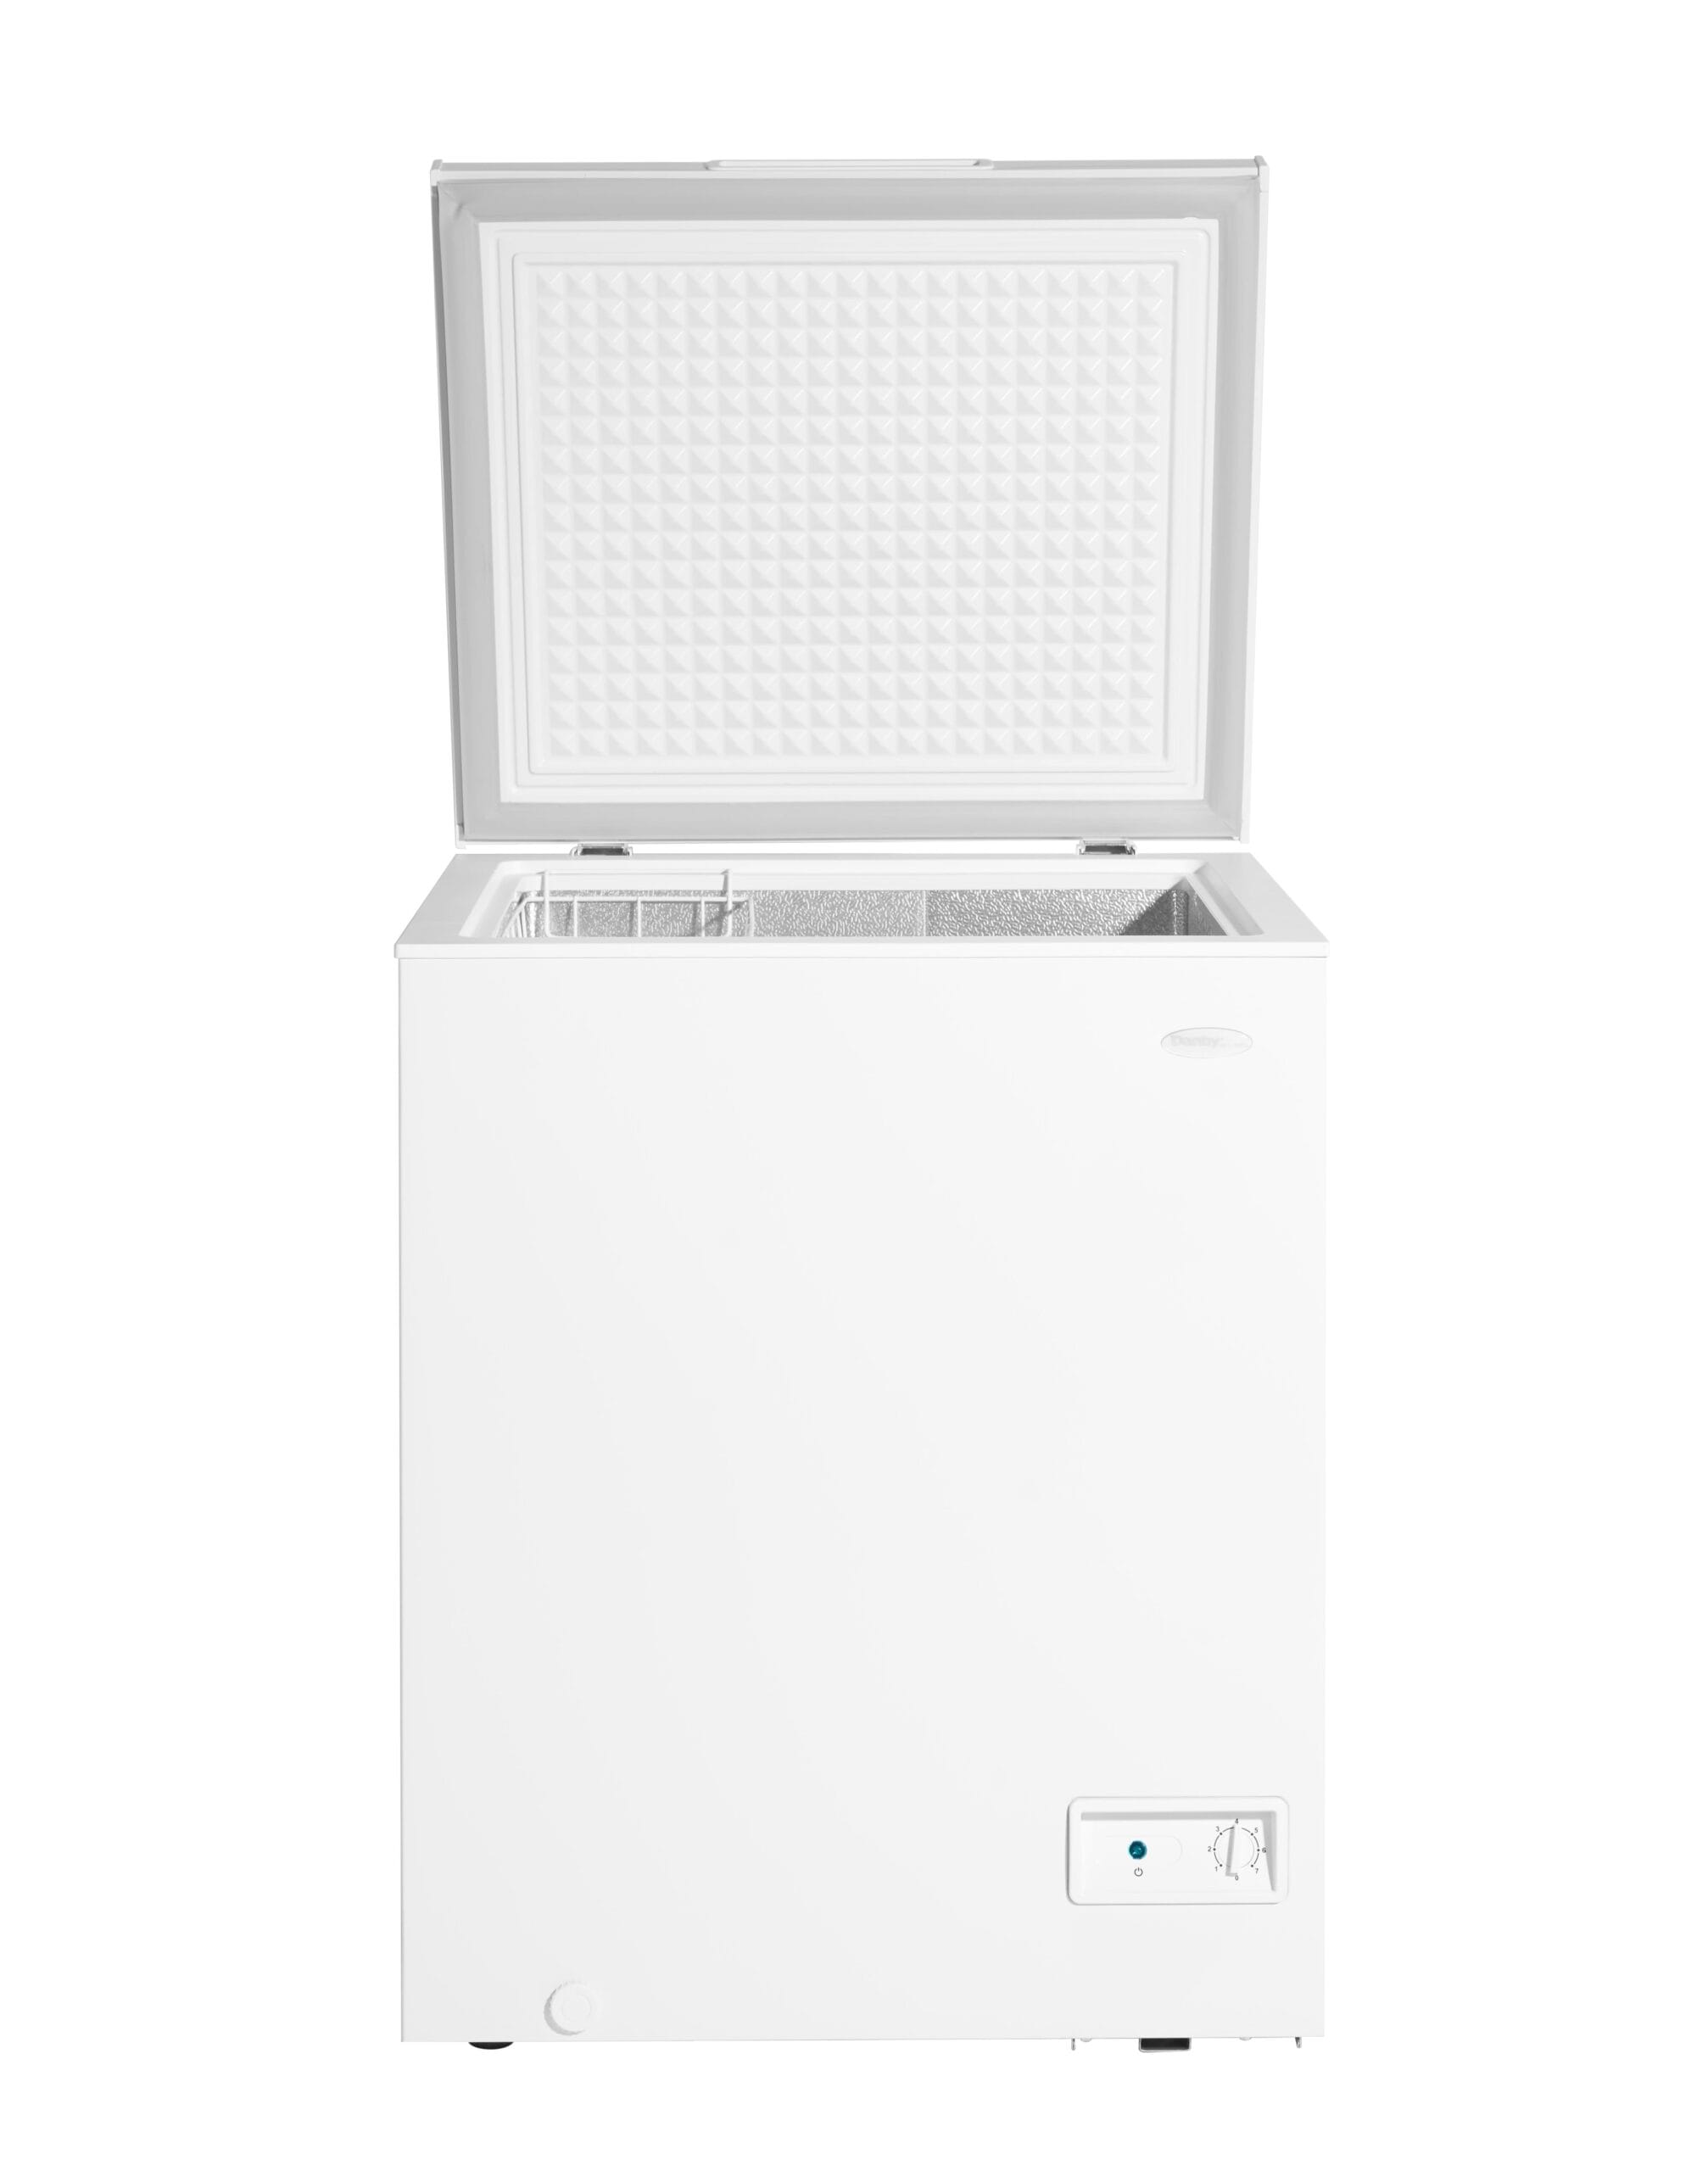 Danby 5.5 cu. ft. Chest Freezer in White - DCF055A2WDB